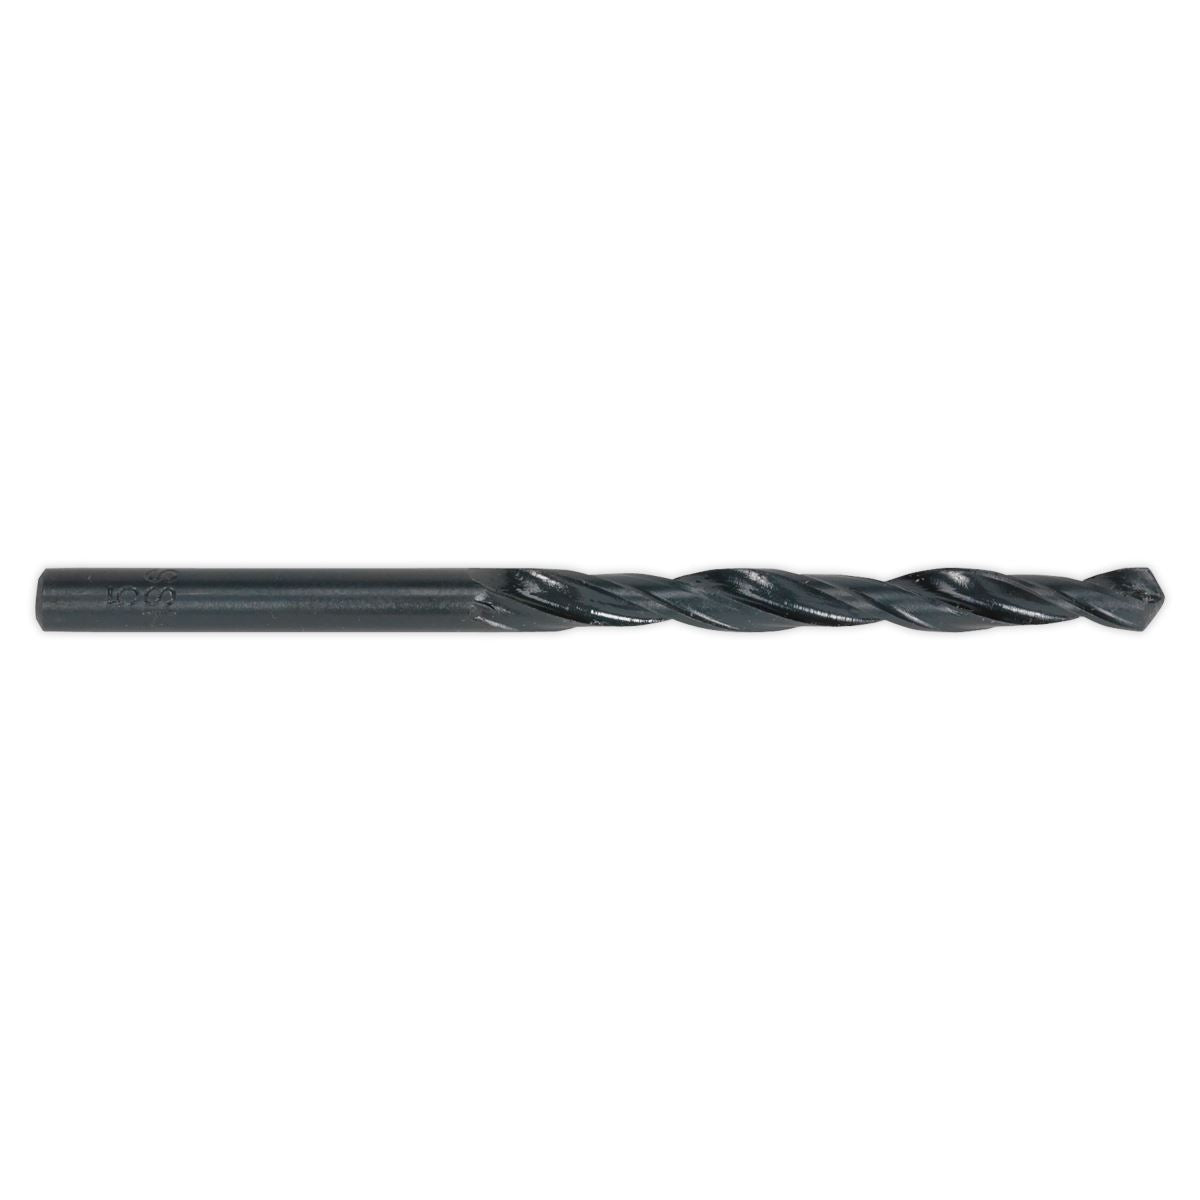 Sealey HSS Roll Forged Drill Bit Ø5.5mm Pack of 10